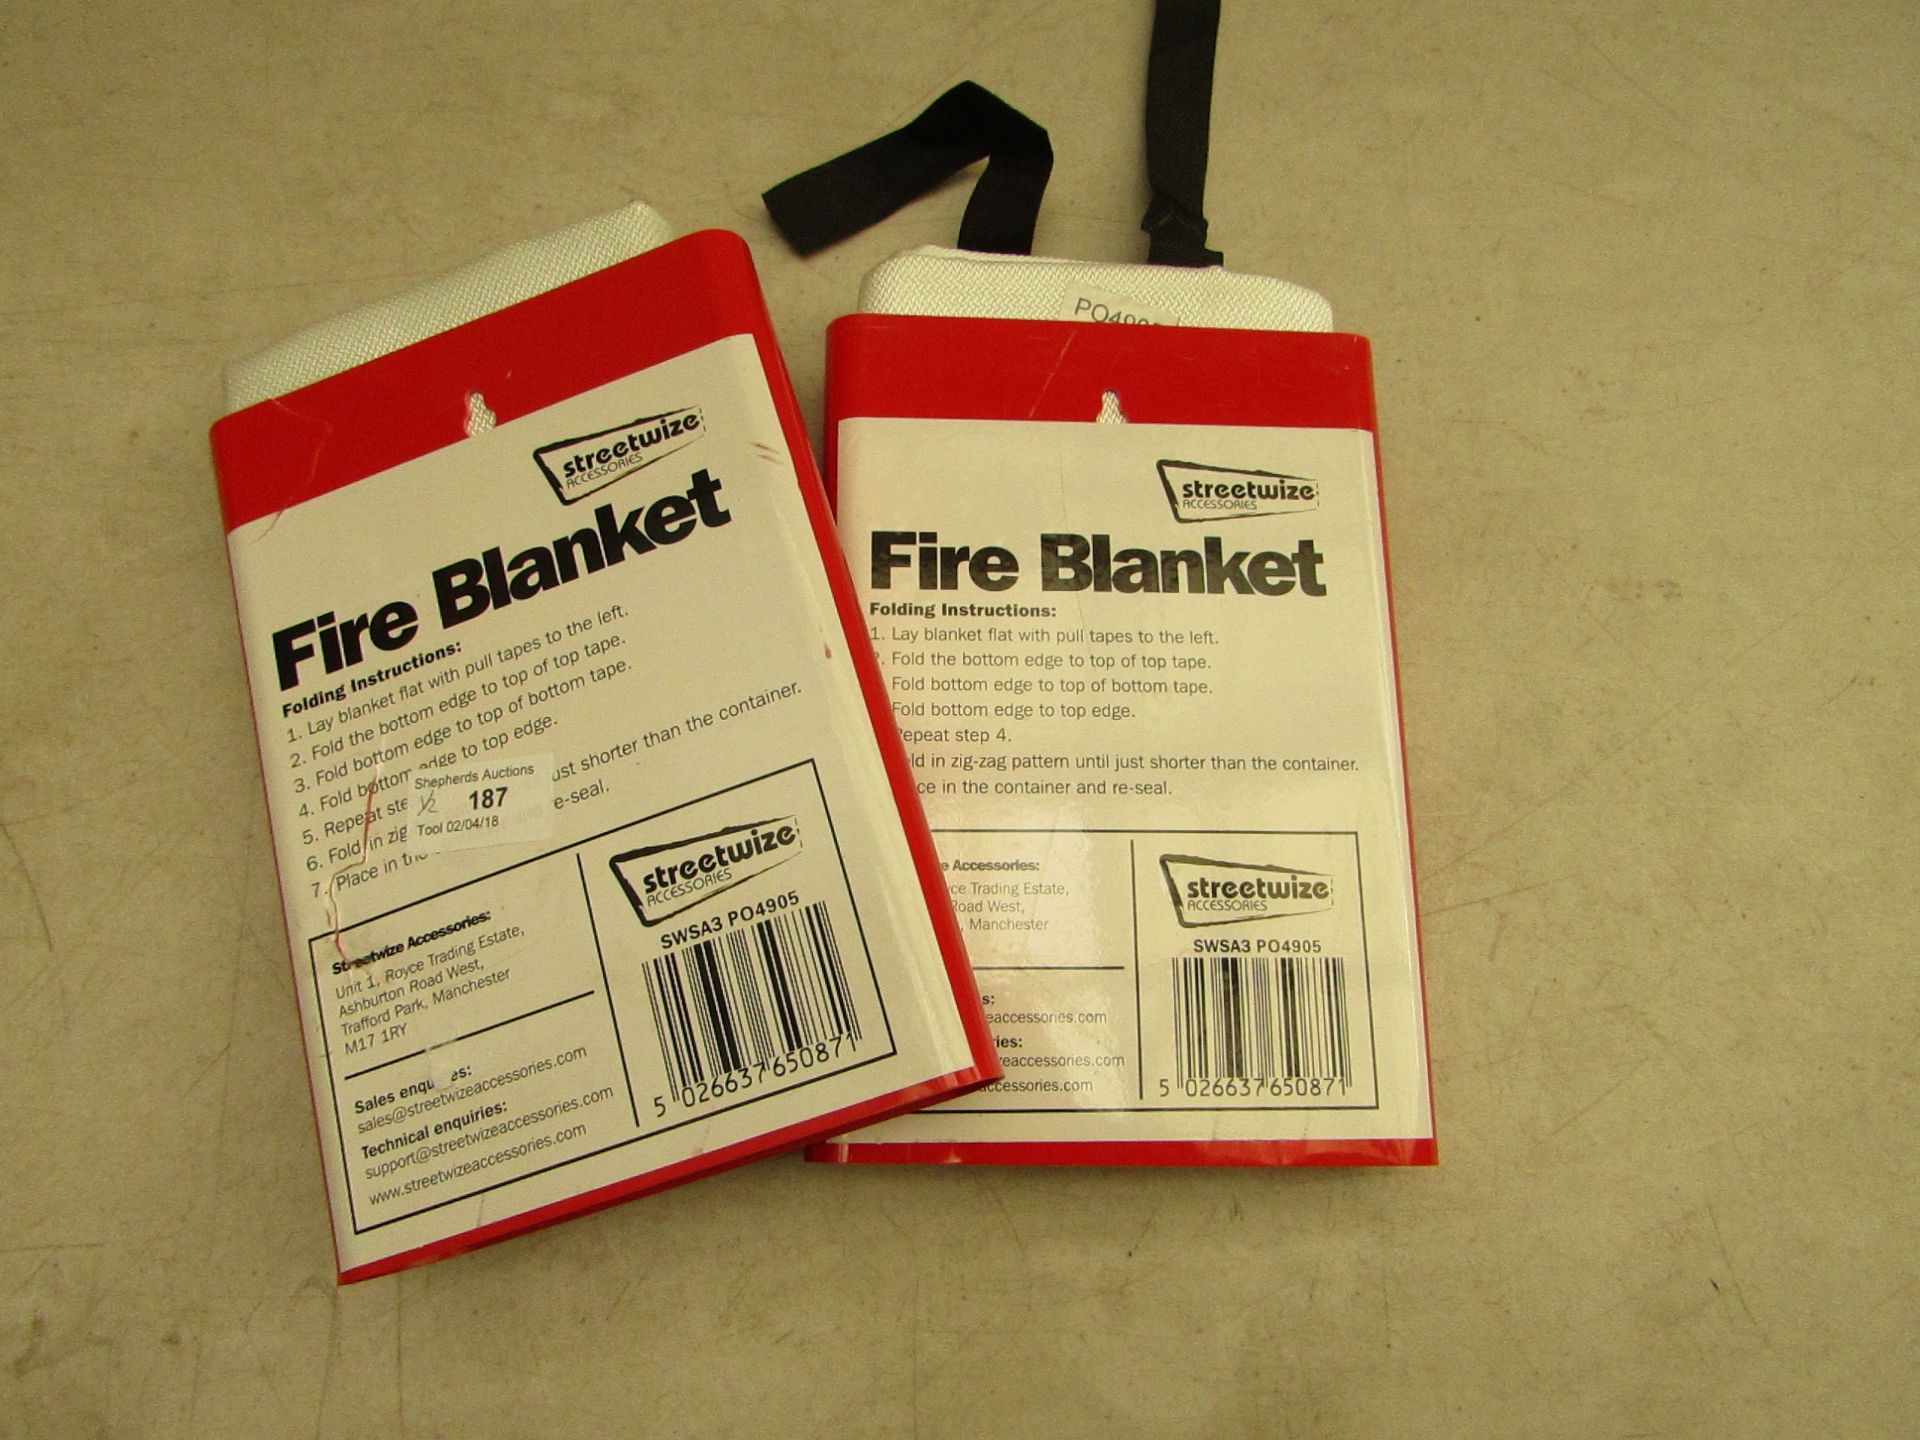 2x streetwize fire blankets, both unchecked